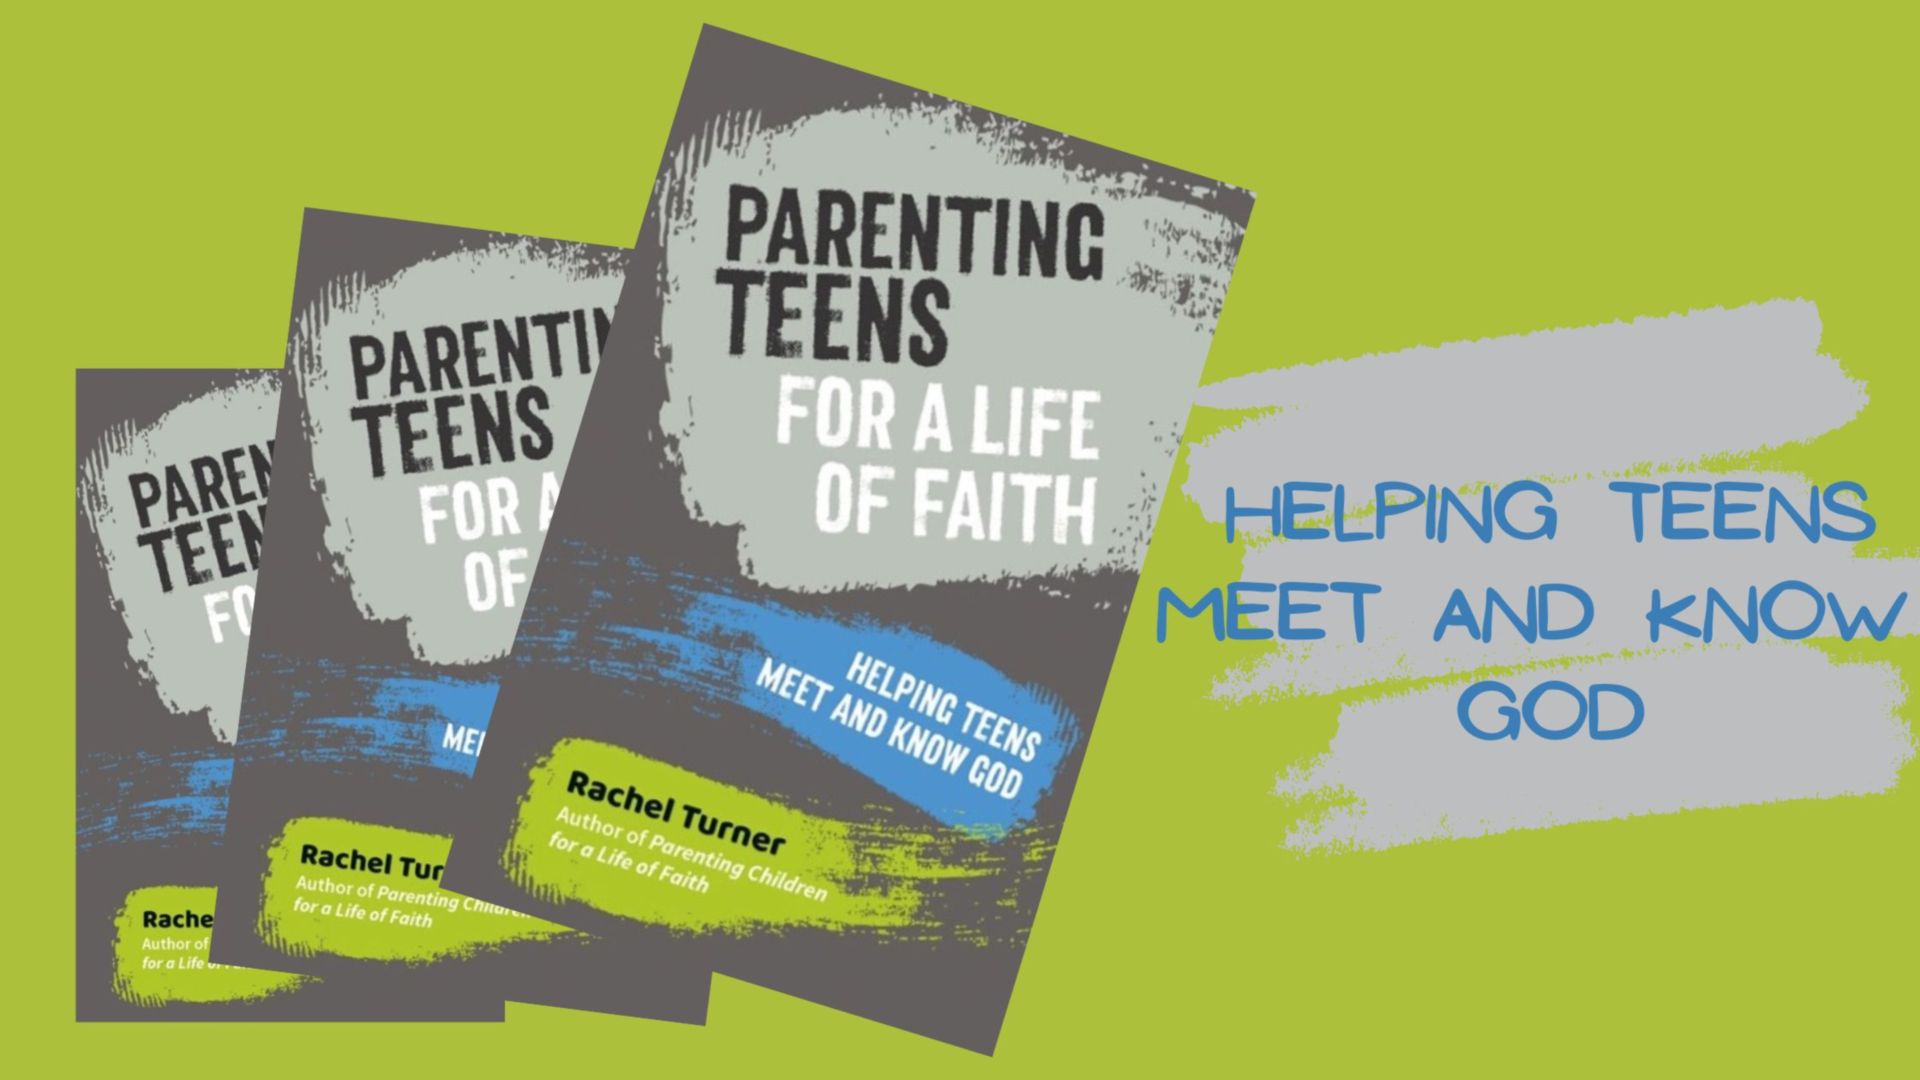 Thoughts on the book and personal experience of 'Parenting Teens'